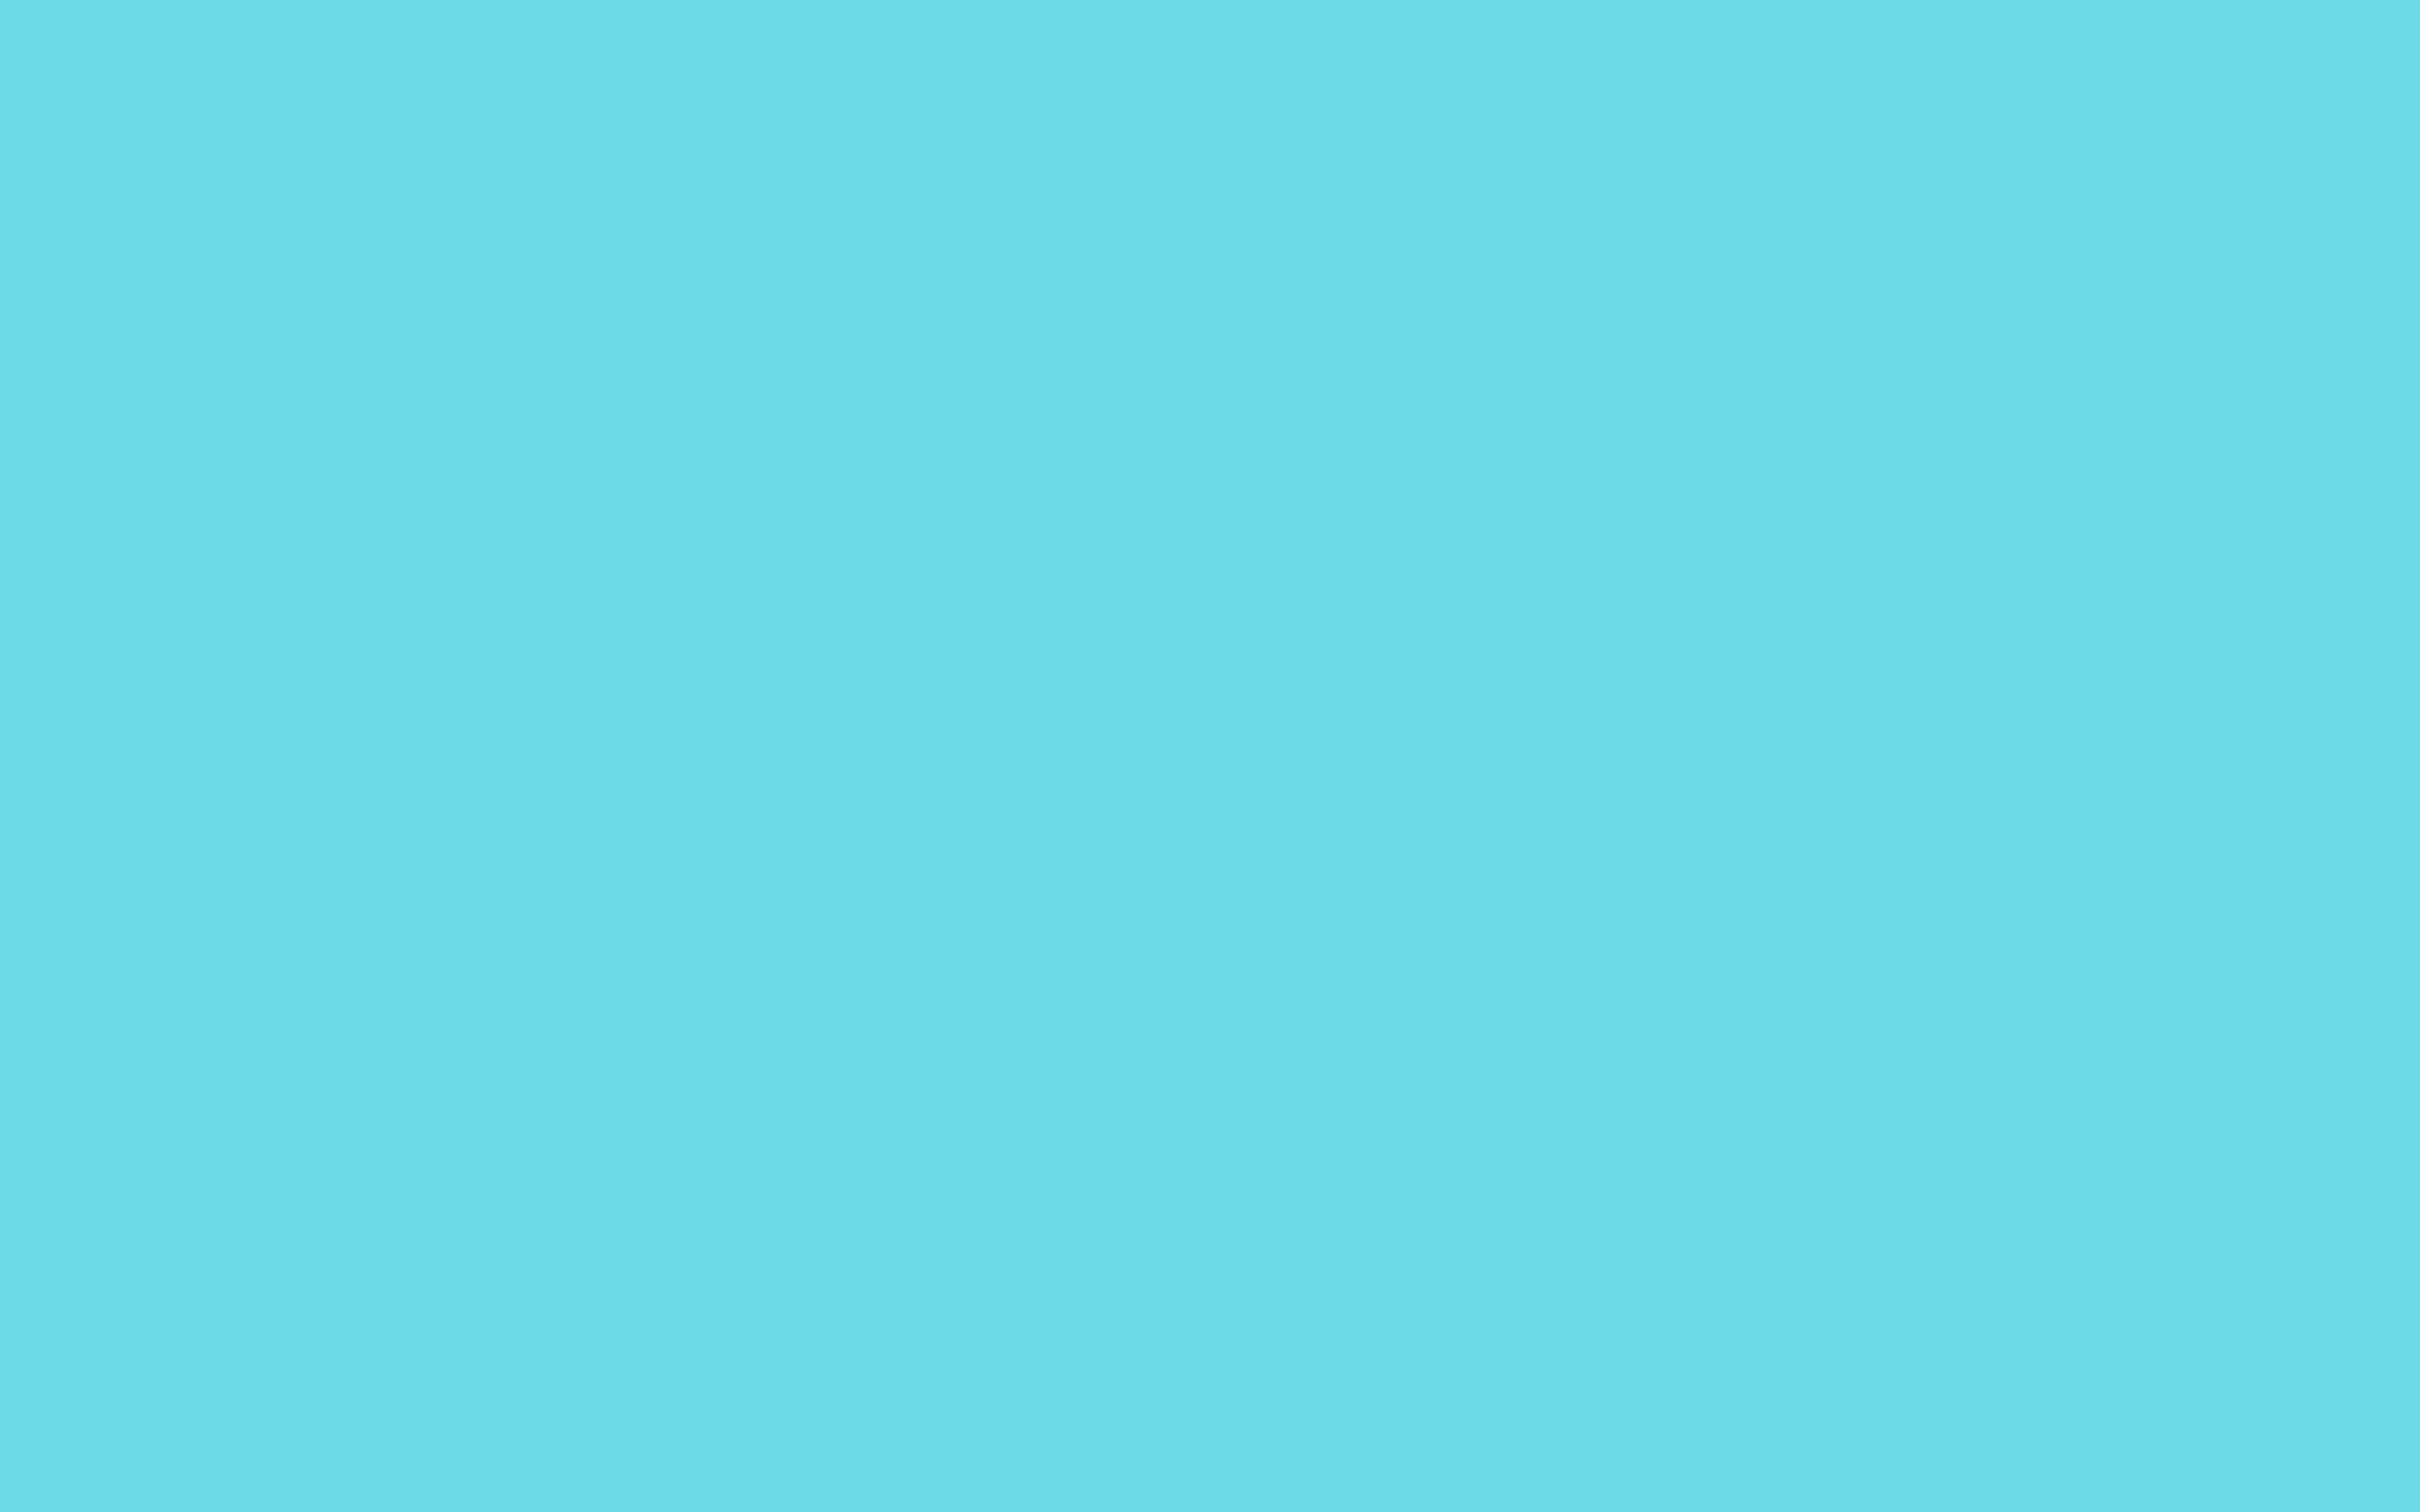 High Resolution Wallpaper | Turquoise Blue 2880x1800 px